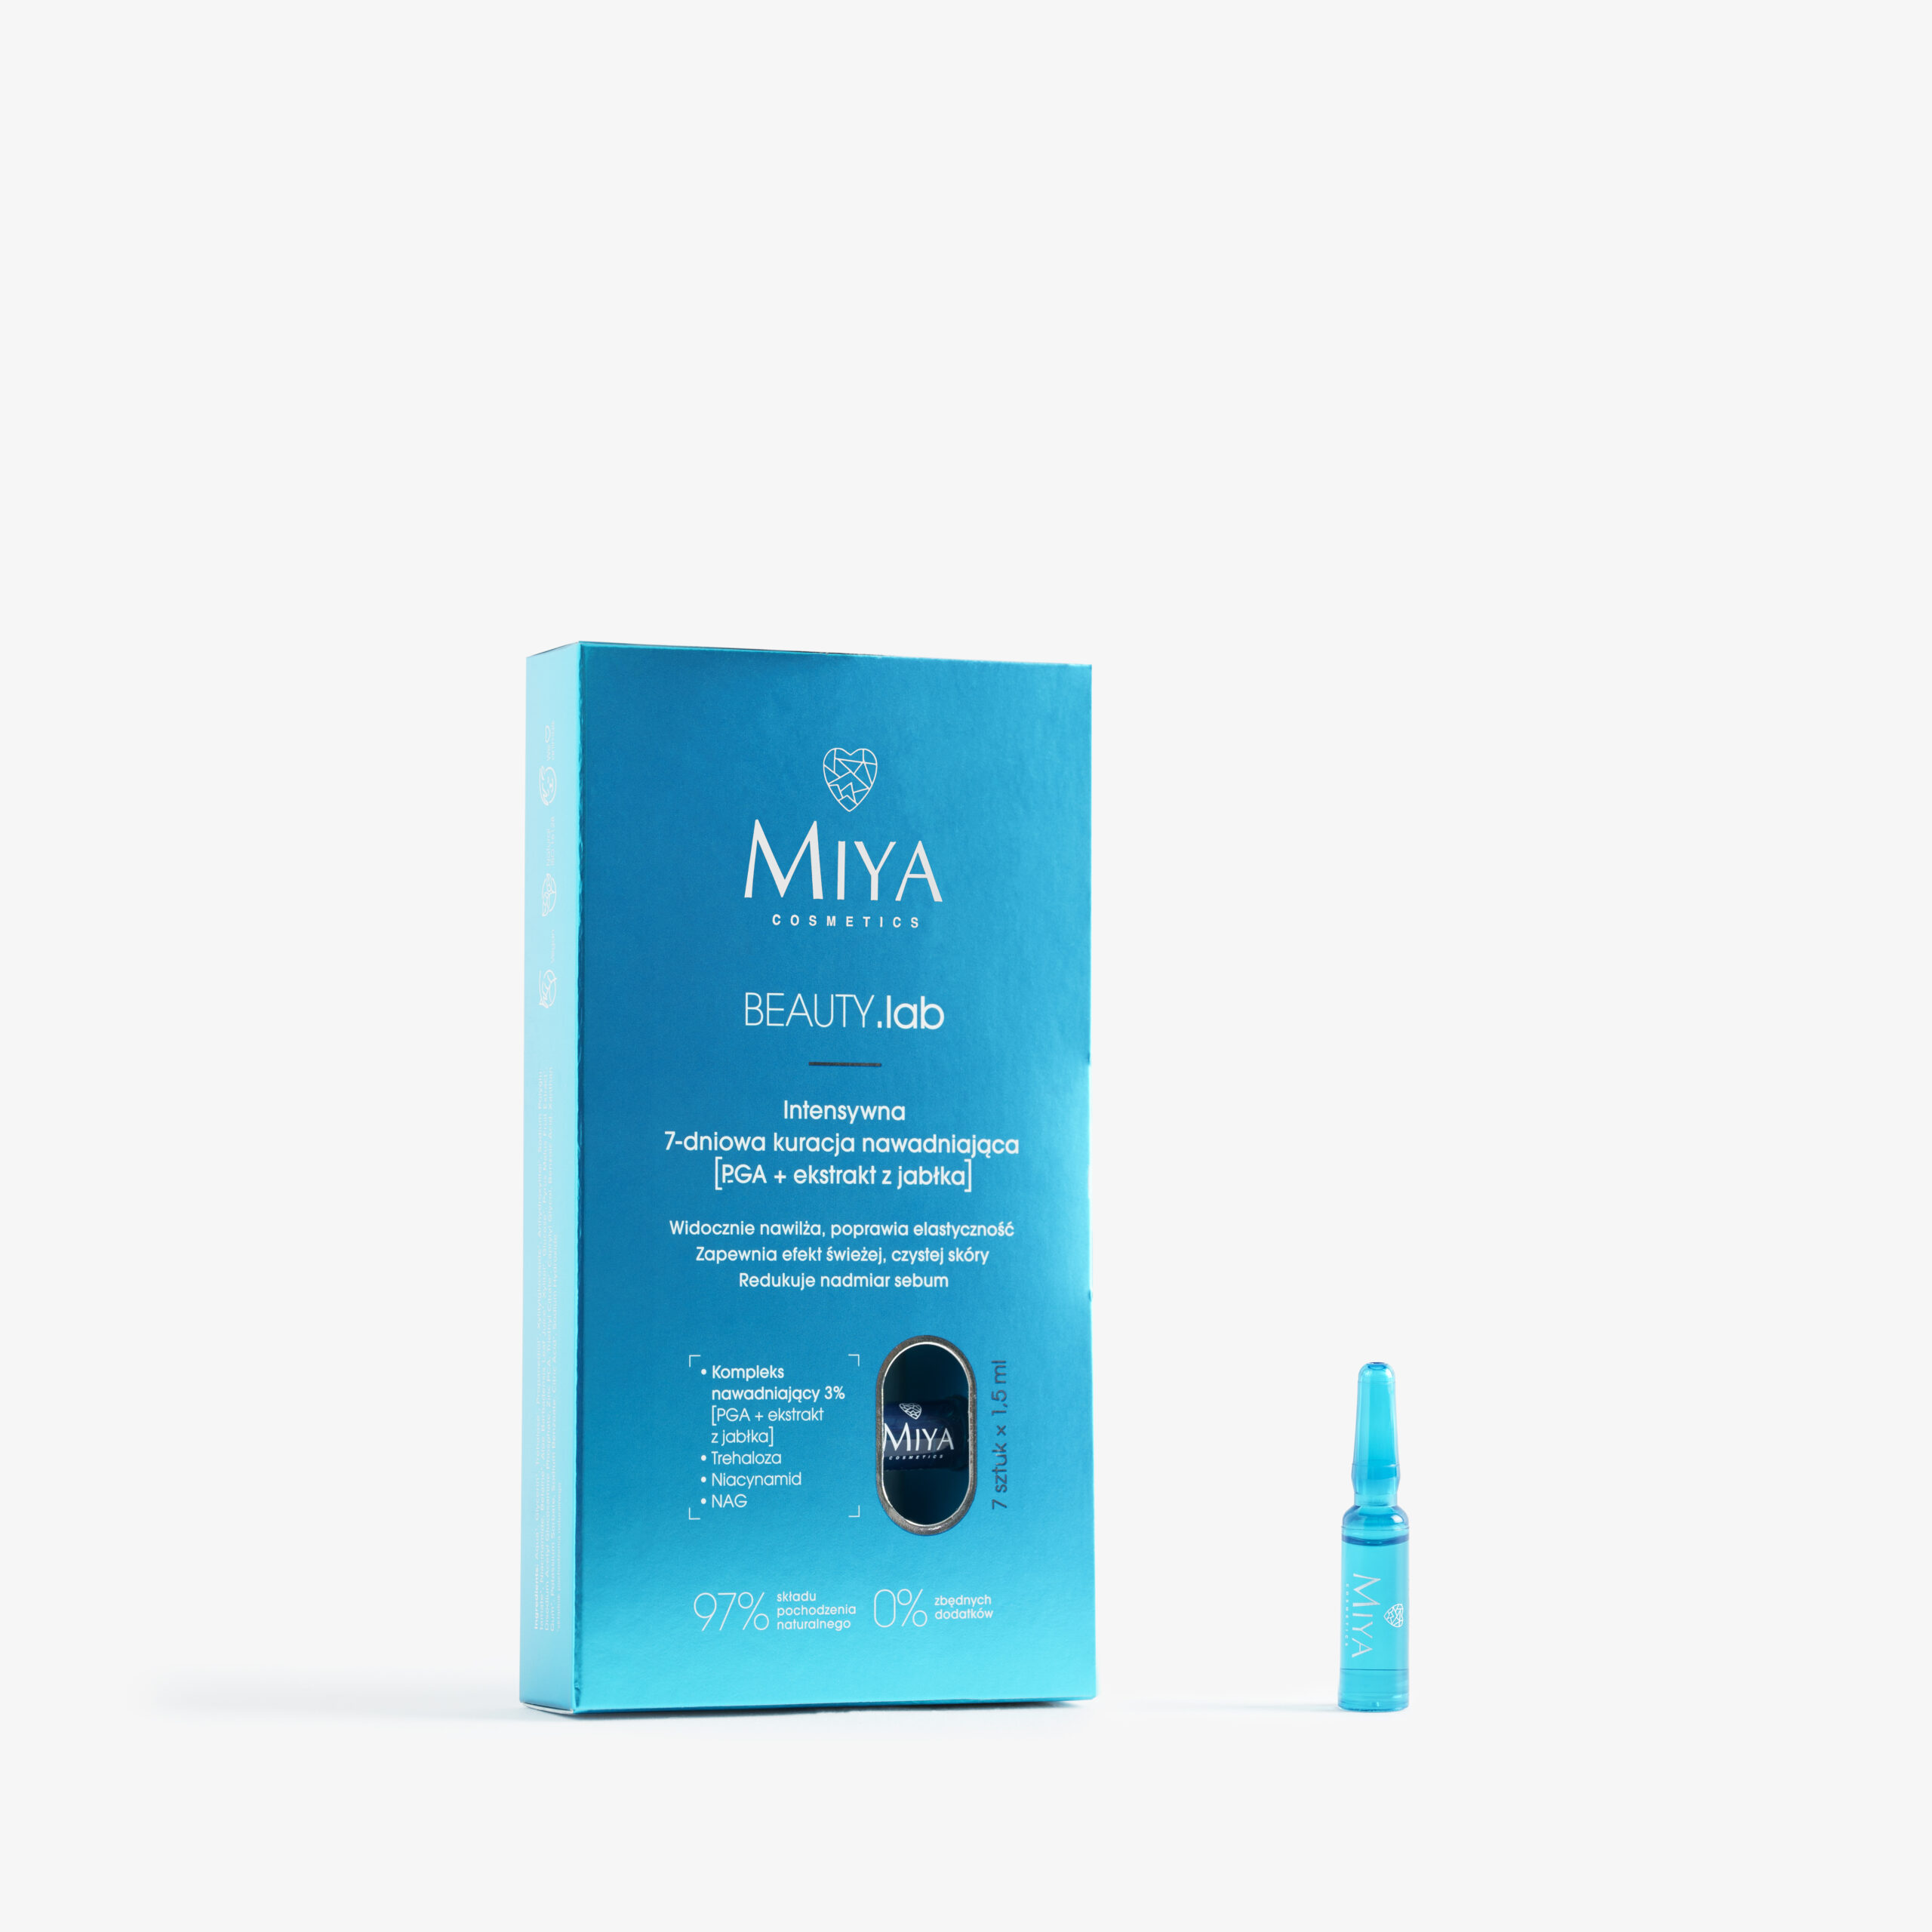 Intensive 7-day hydration treatment [PGA + apple extract]